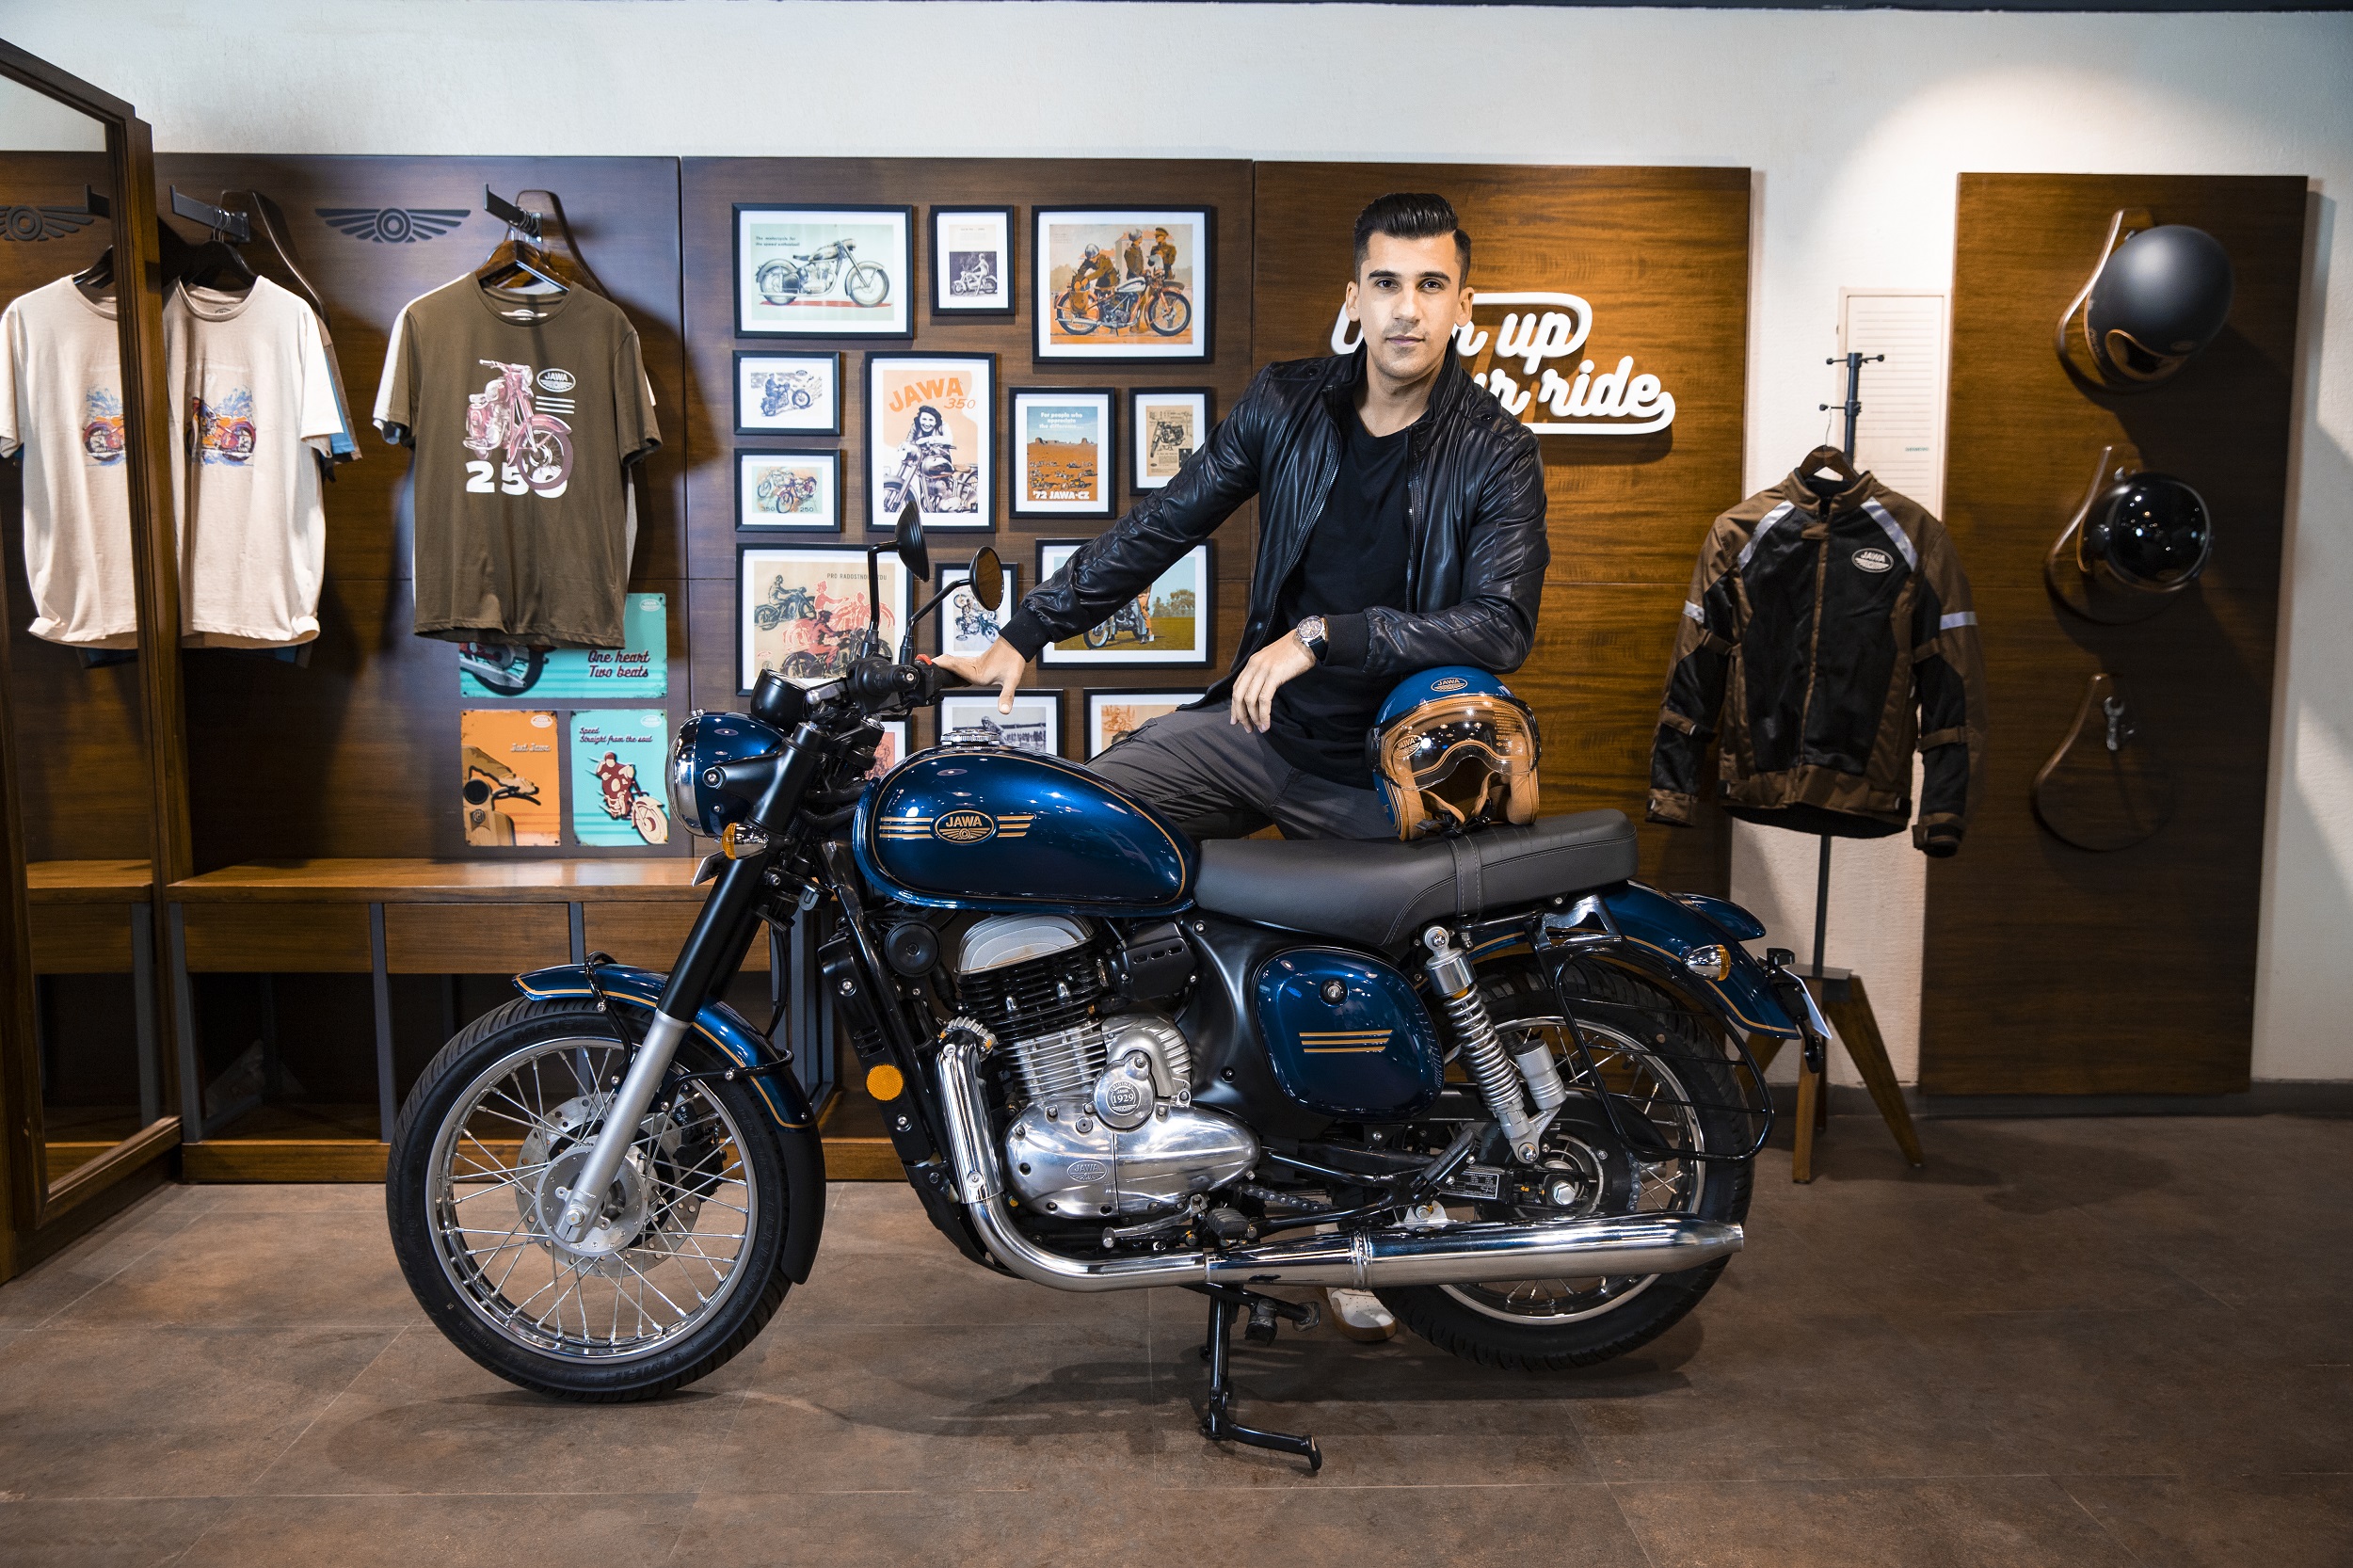 Roadies Revolution winner rides home a brand new Jawa forty two decoding=